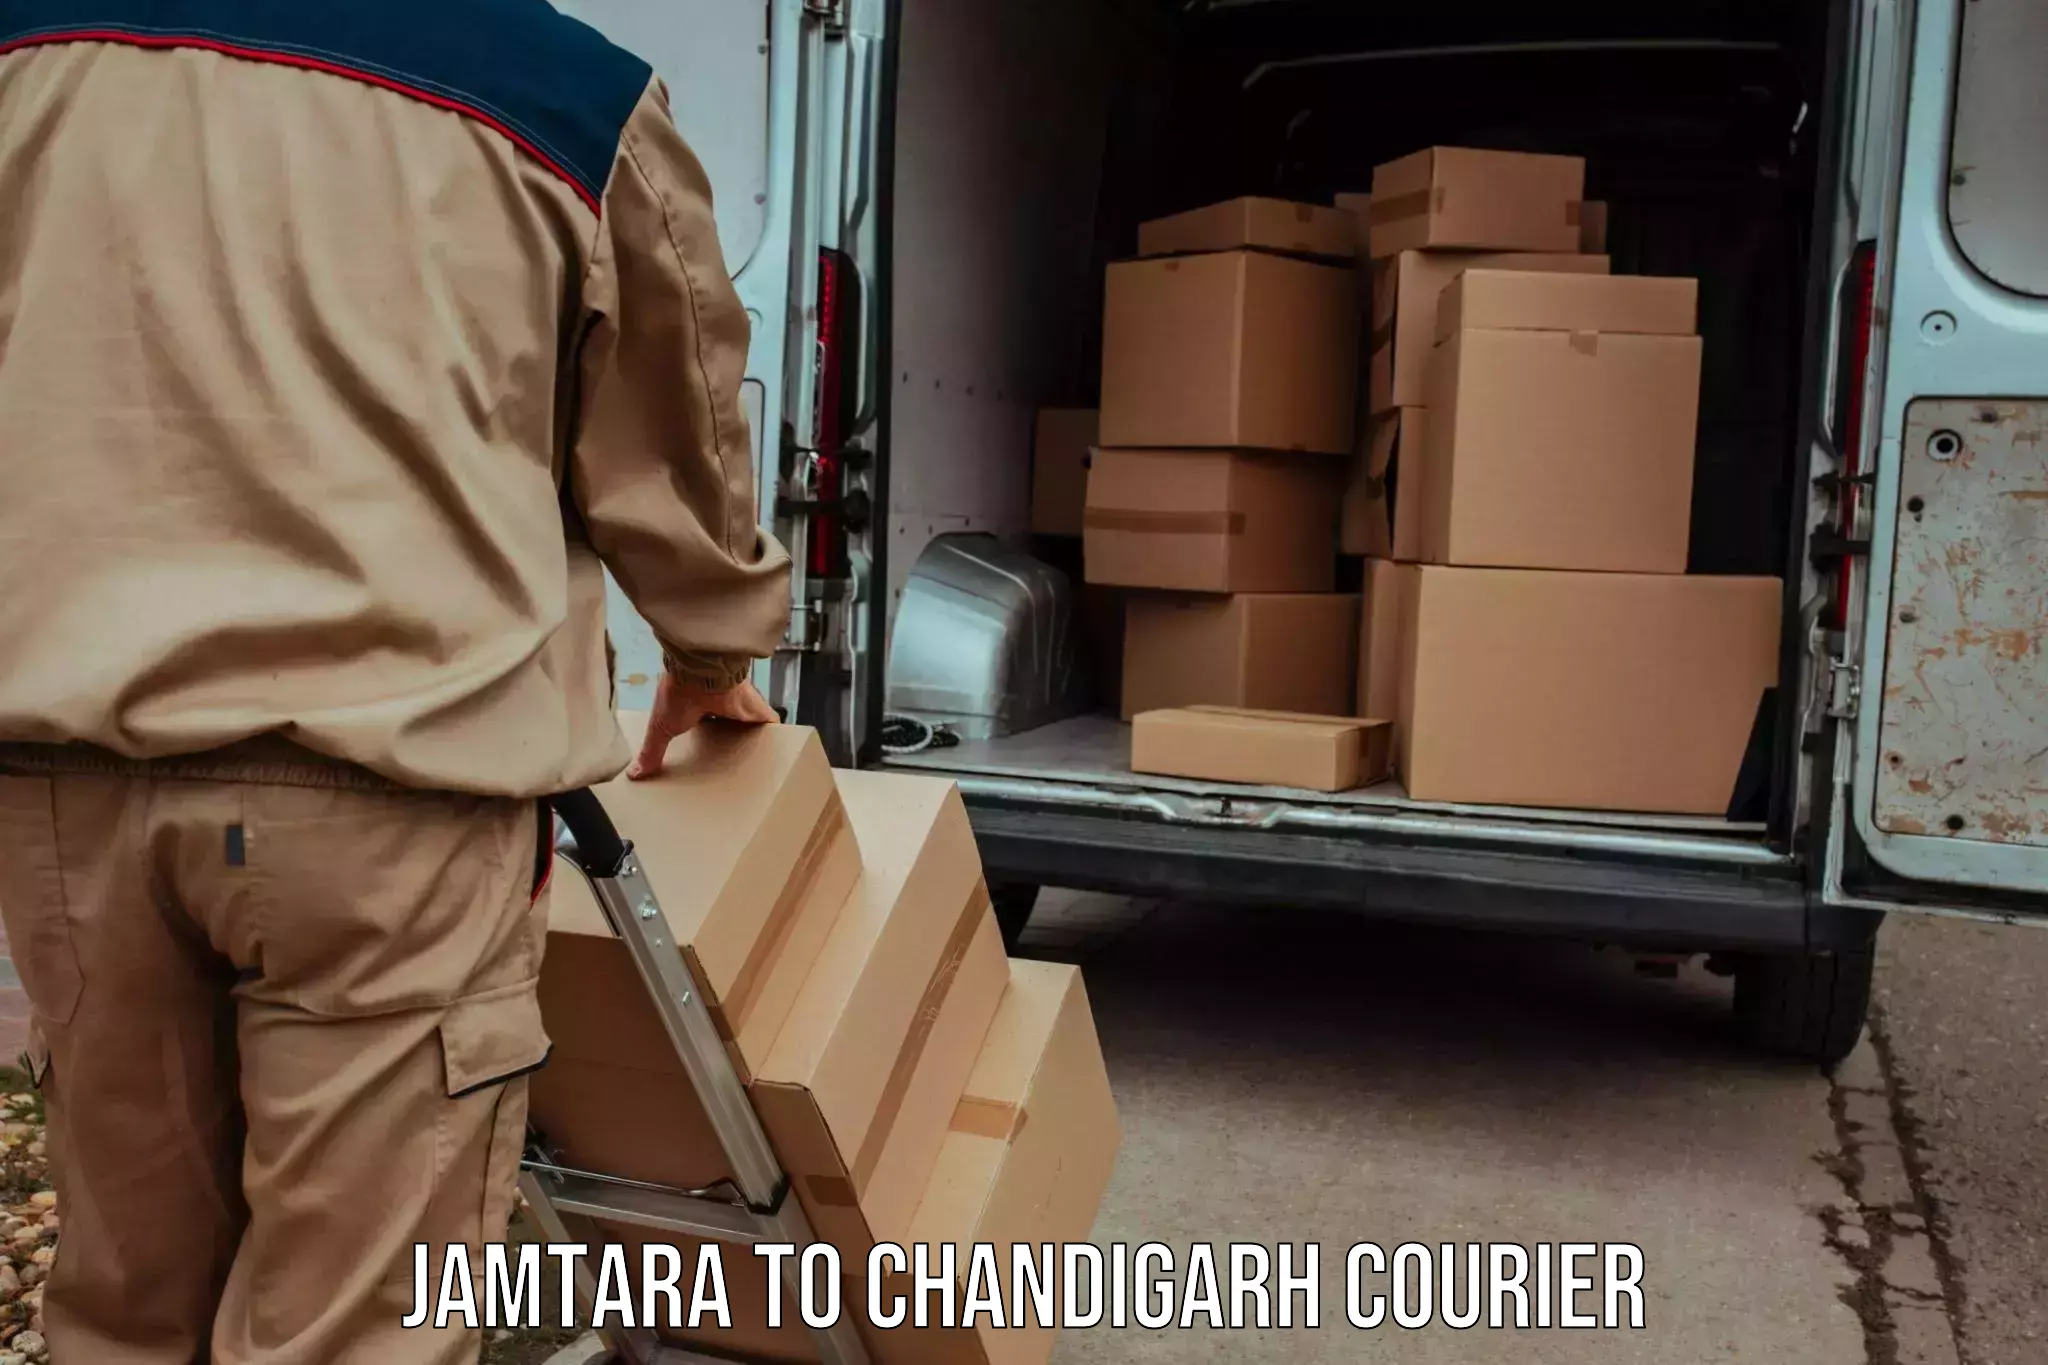 Express delivery network Jamtara to Chandigarh